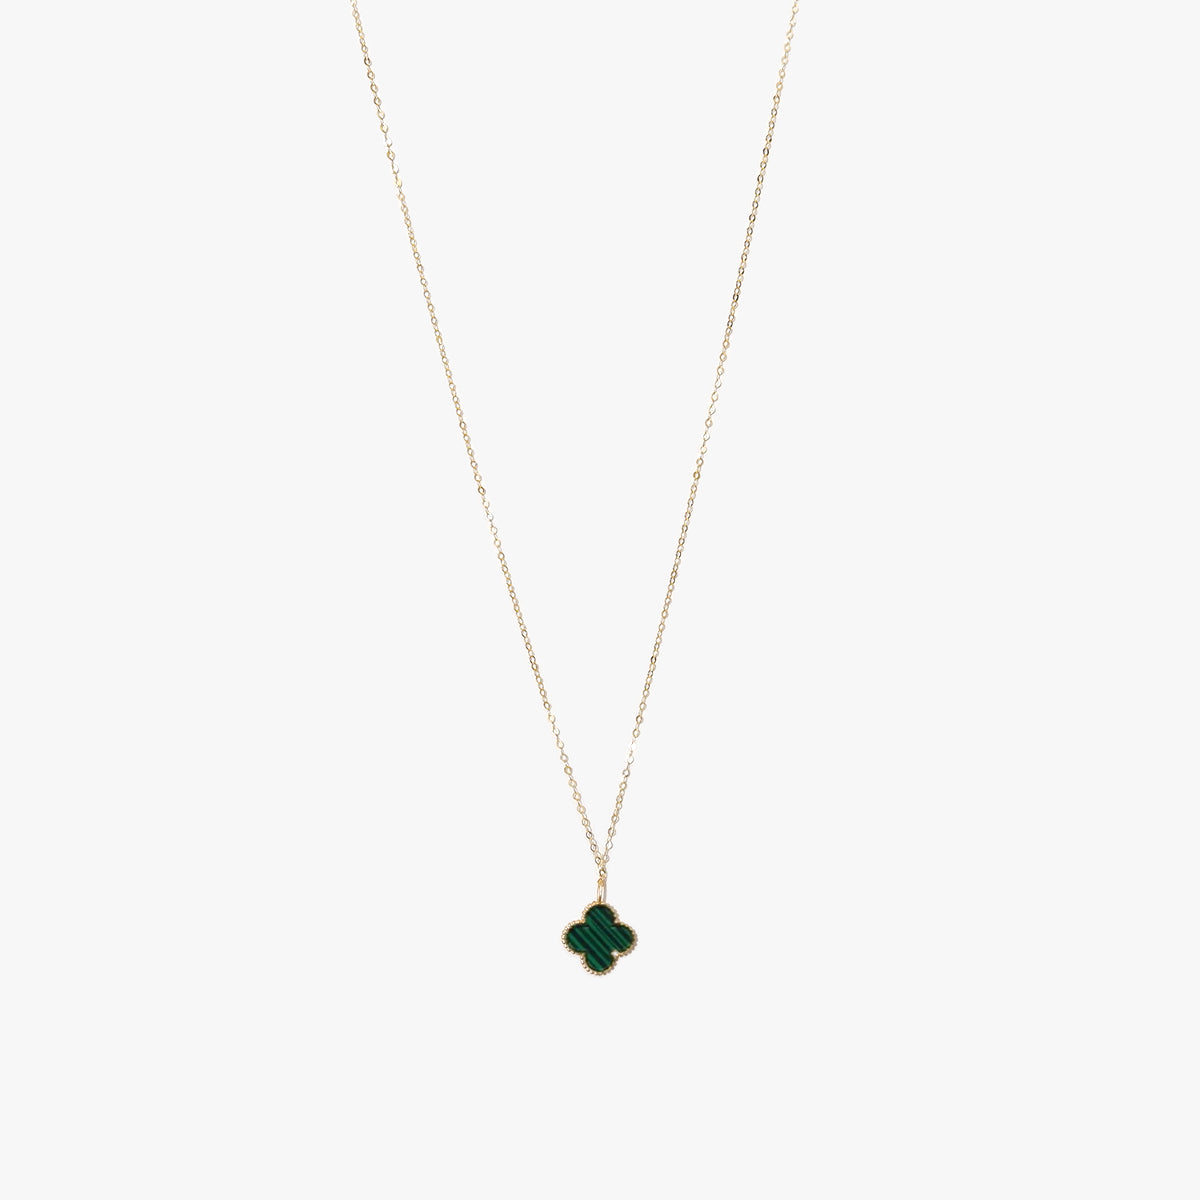 The Mini Diamond Clover Necklace in Solid Gold